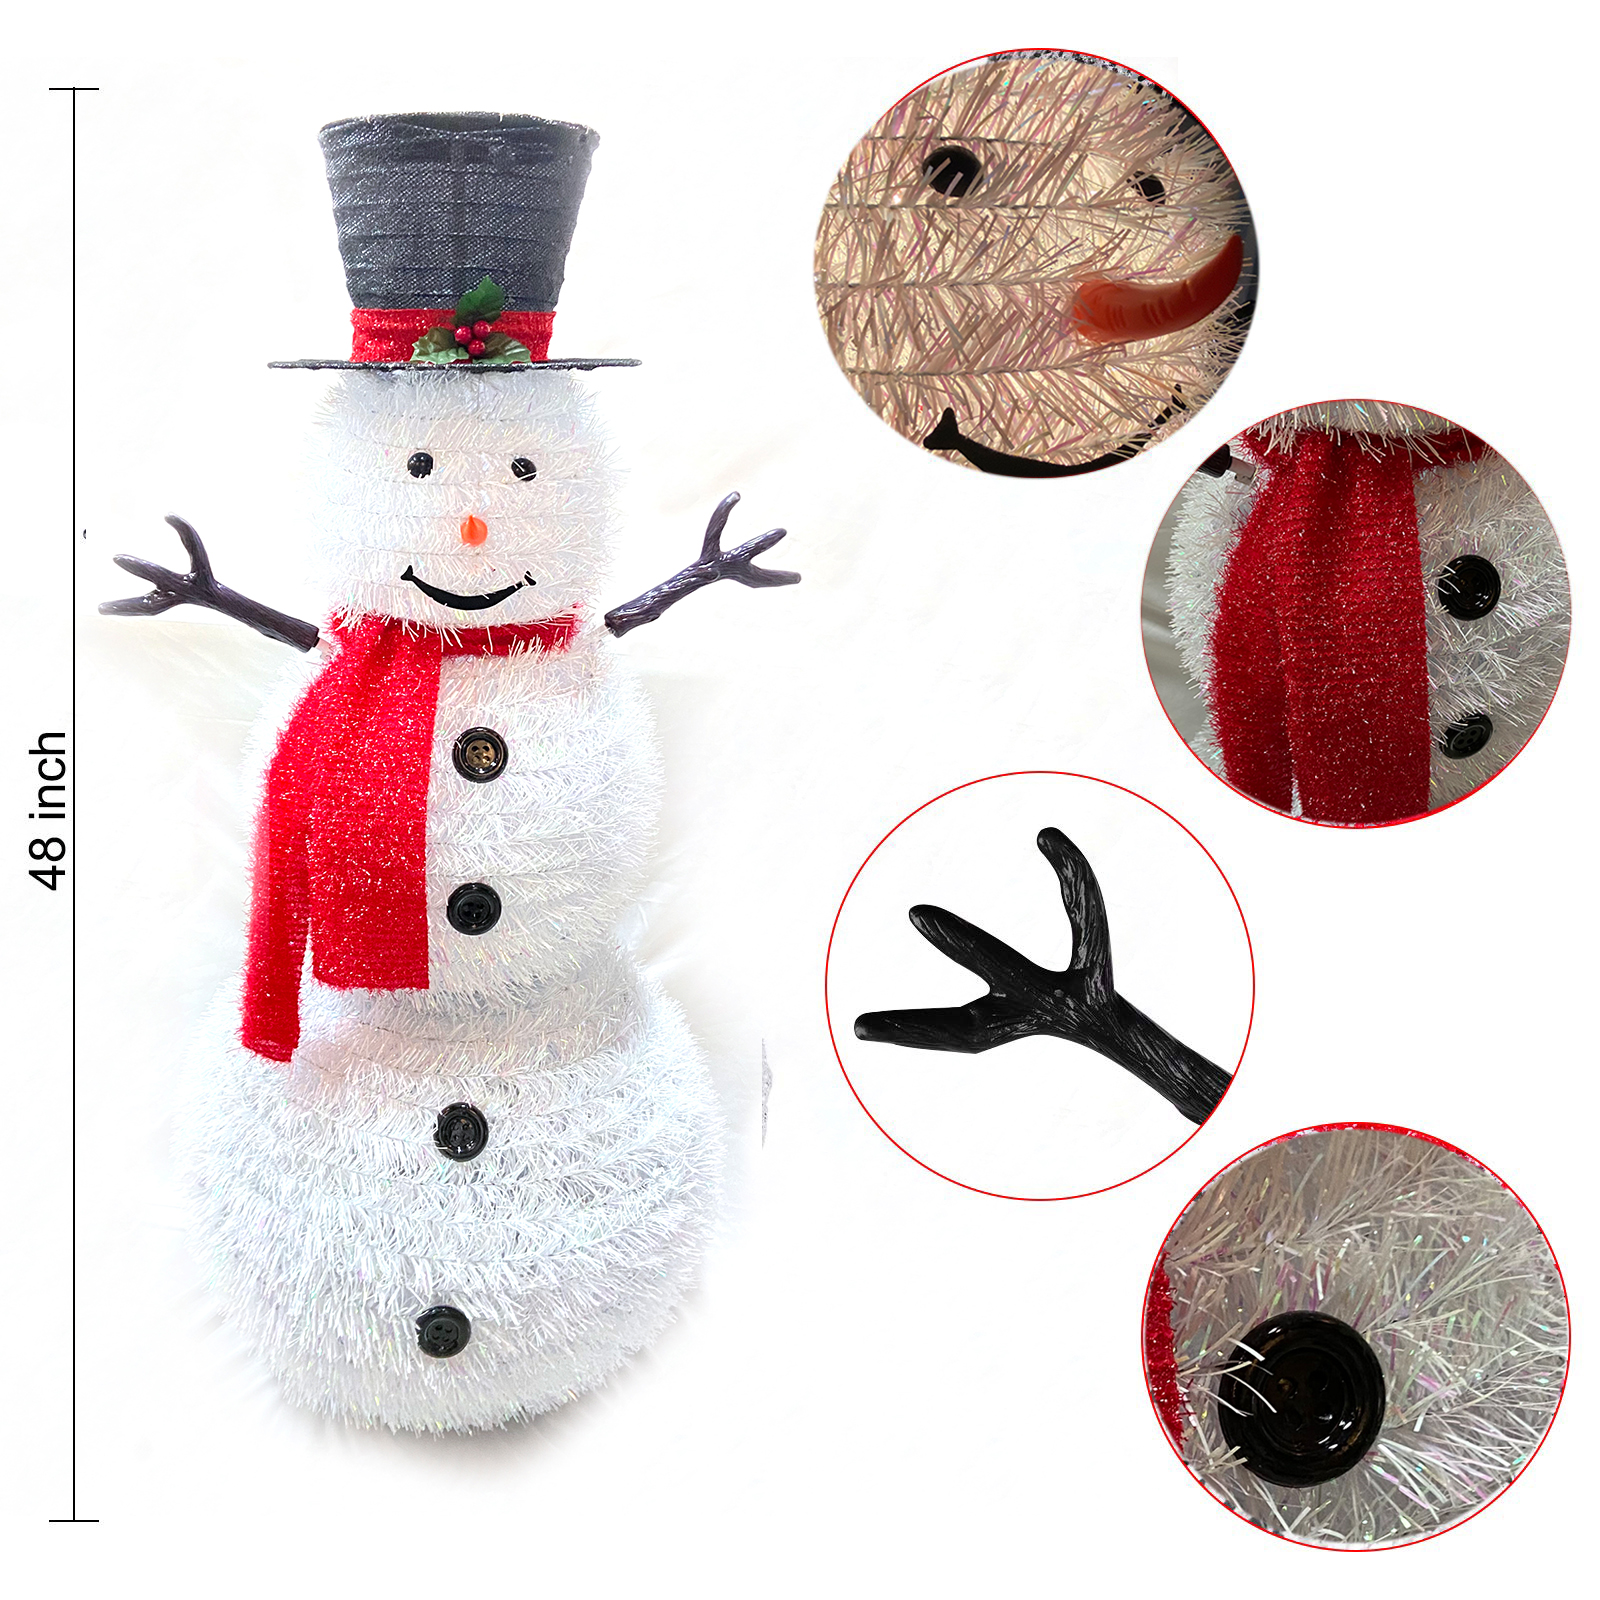 48 inches Pop up snowman Pre-Lit White PVC Collapsible Christmas Snowman with Top Hat and 8 Built-in C7 Bulbs